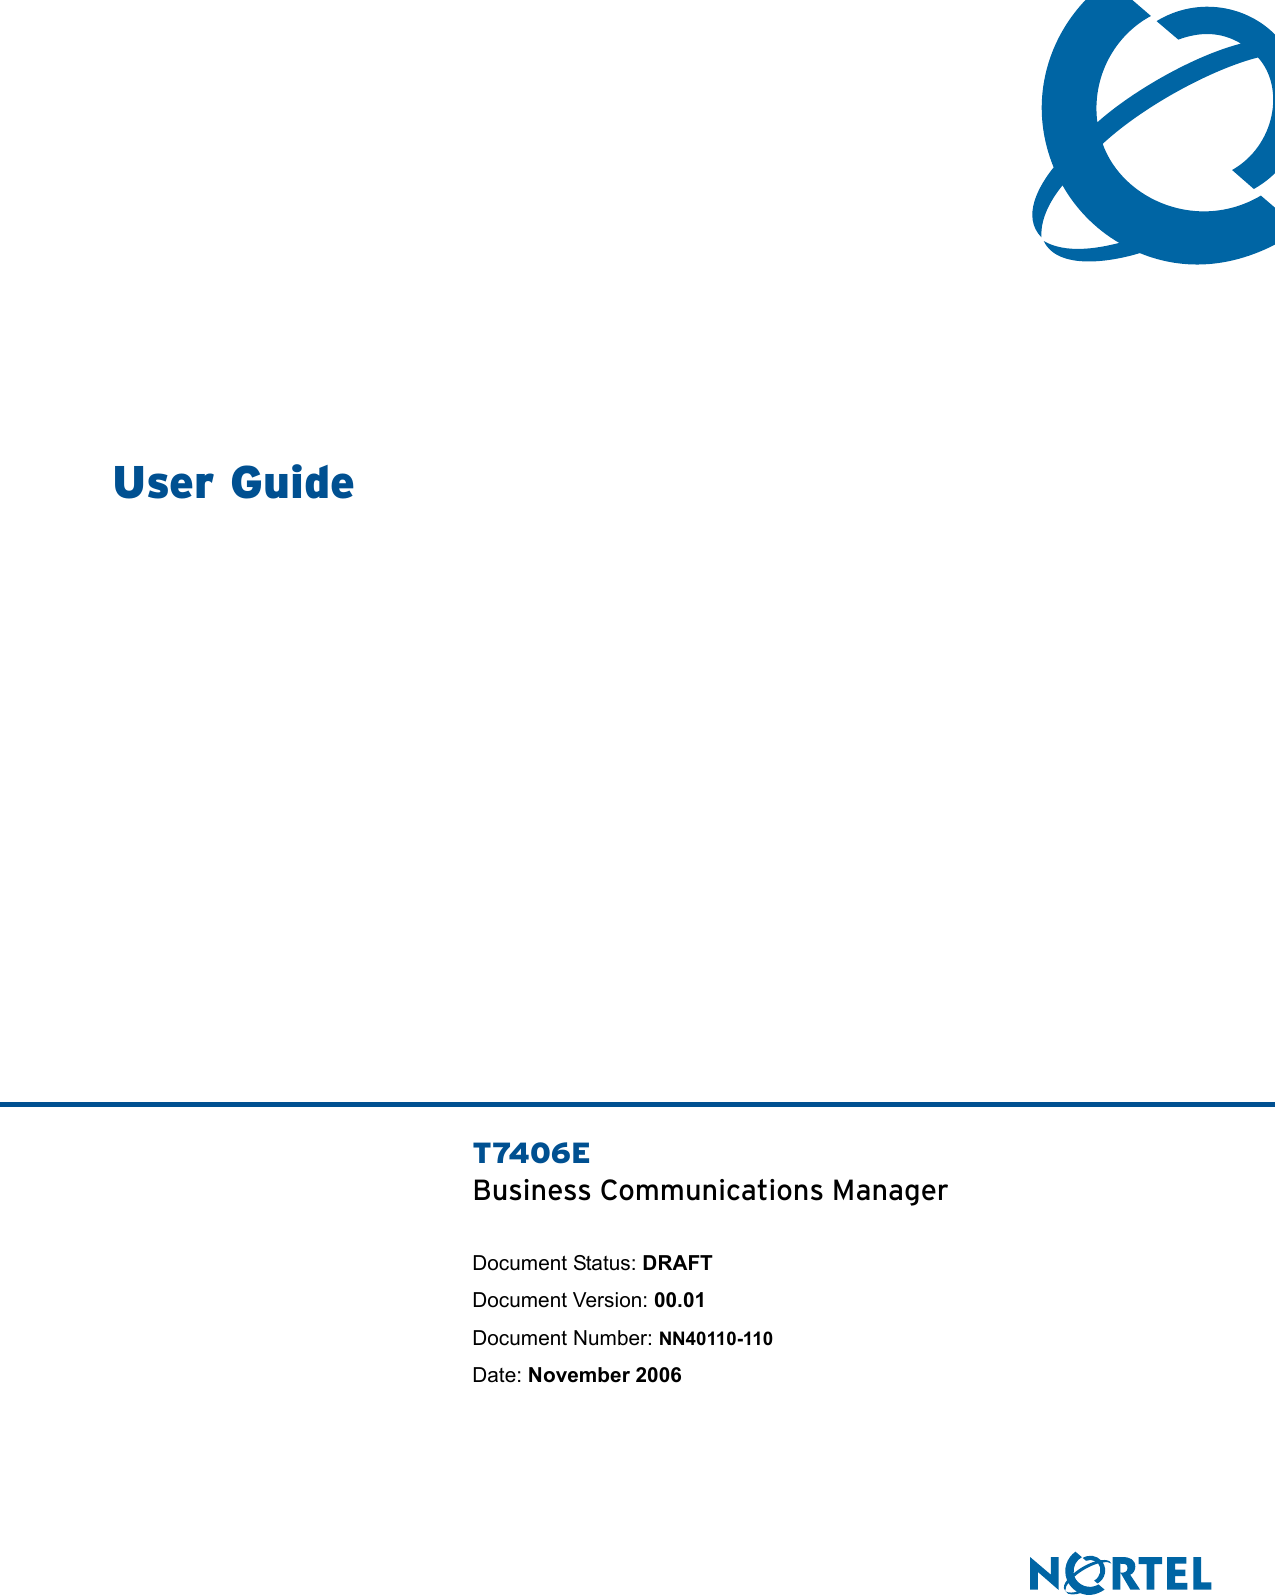 T7406EBusiness Communications ManagerDocument Status: DRAFTDocument Version: 00.01Document Number: NN40110-110Date: November 2006User Guide